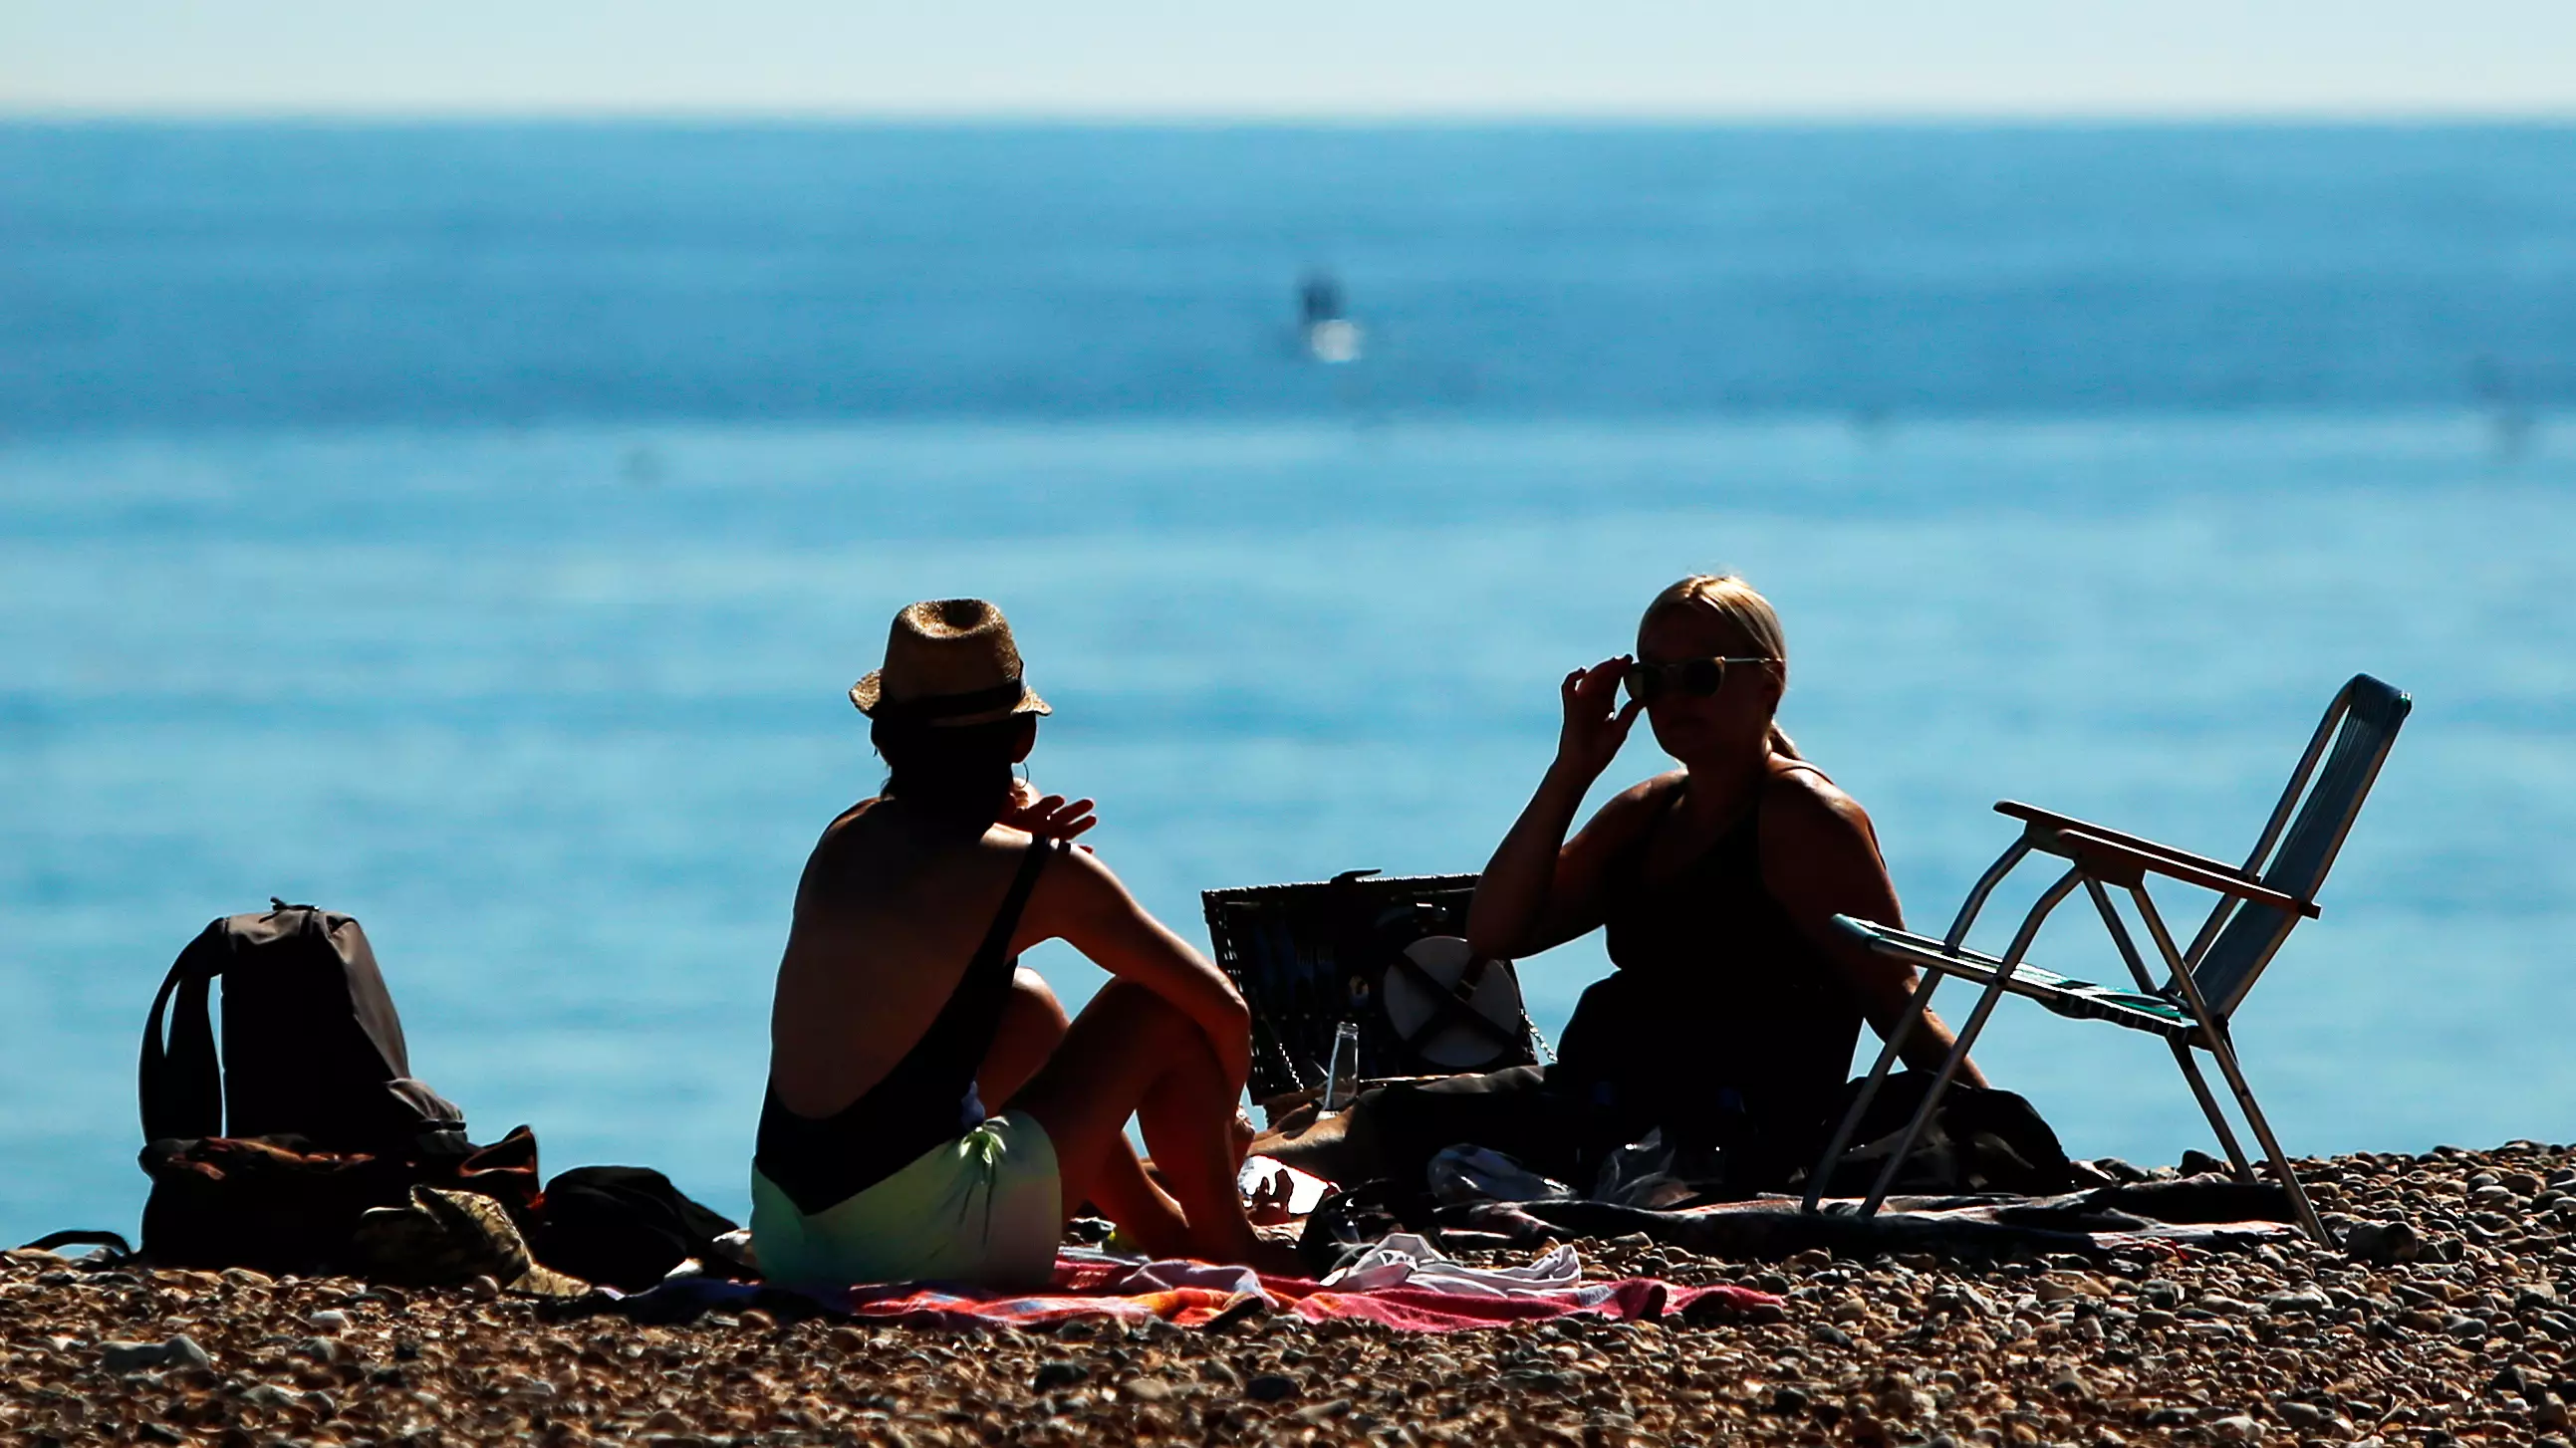 Britain Could Be Set For 'Super Summer' Of Warm Weather